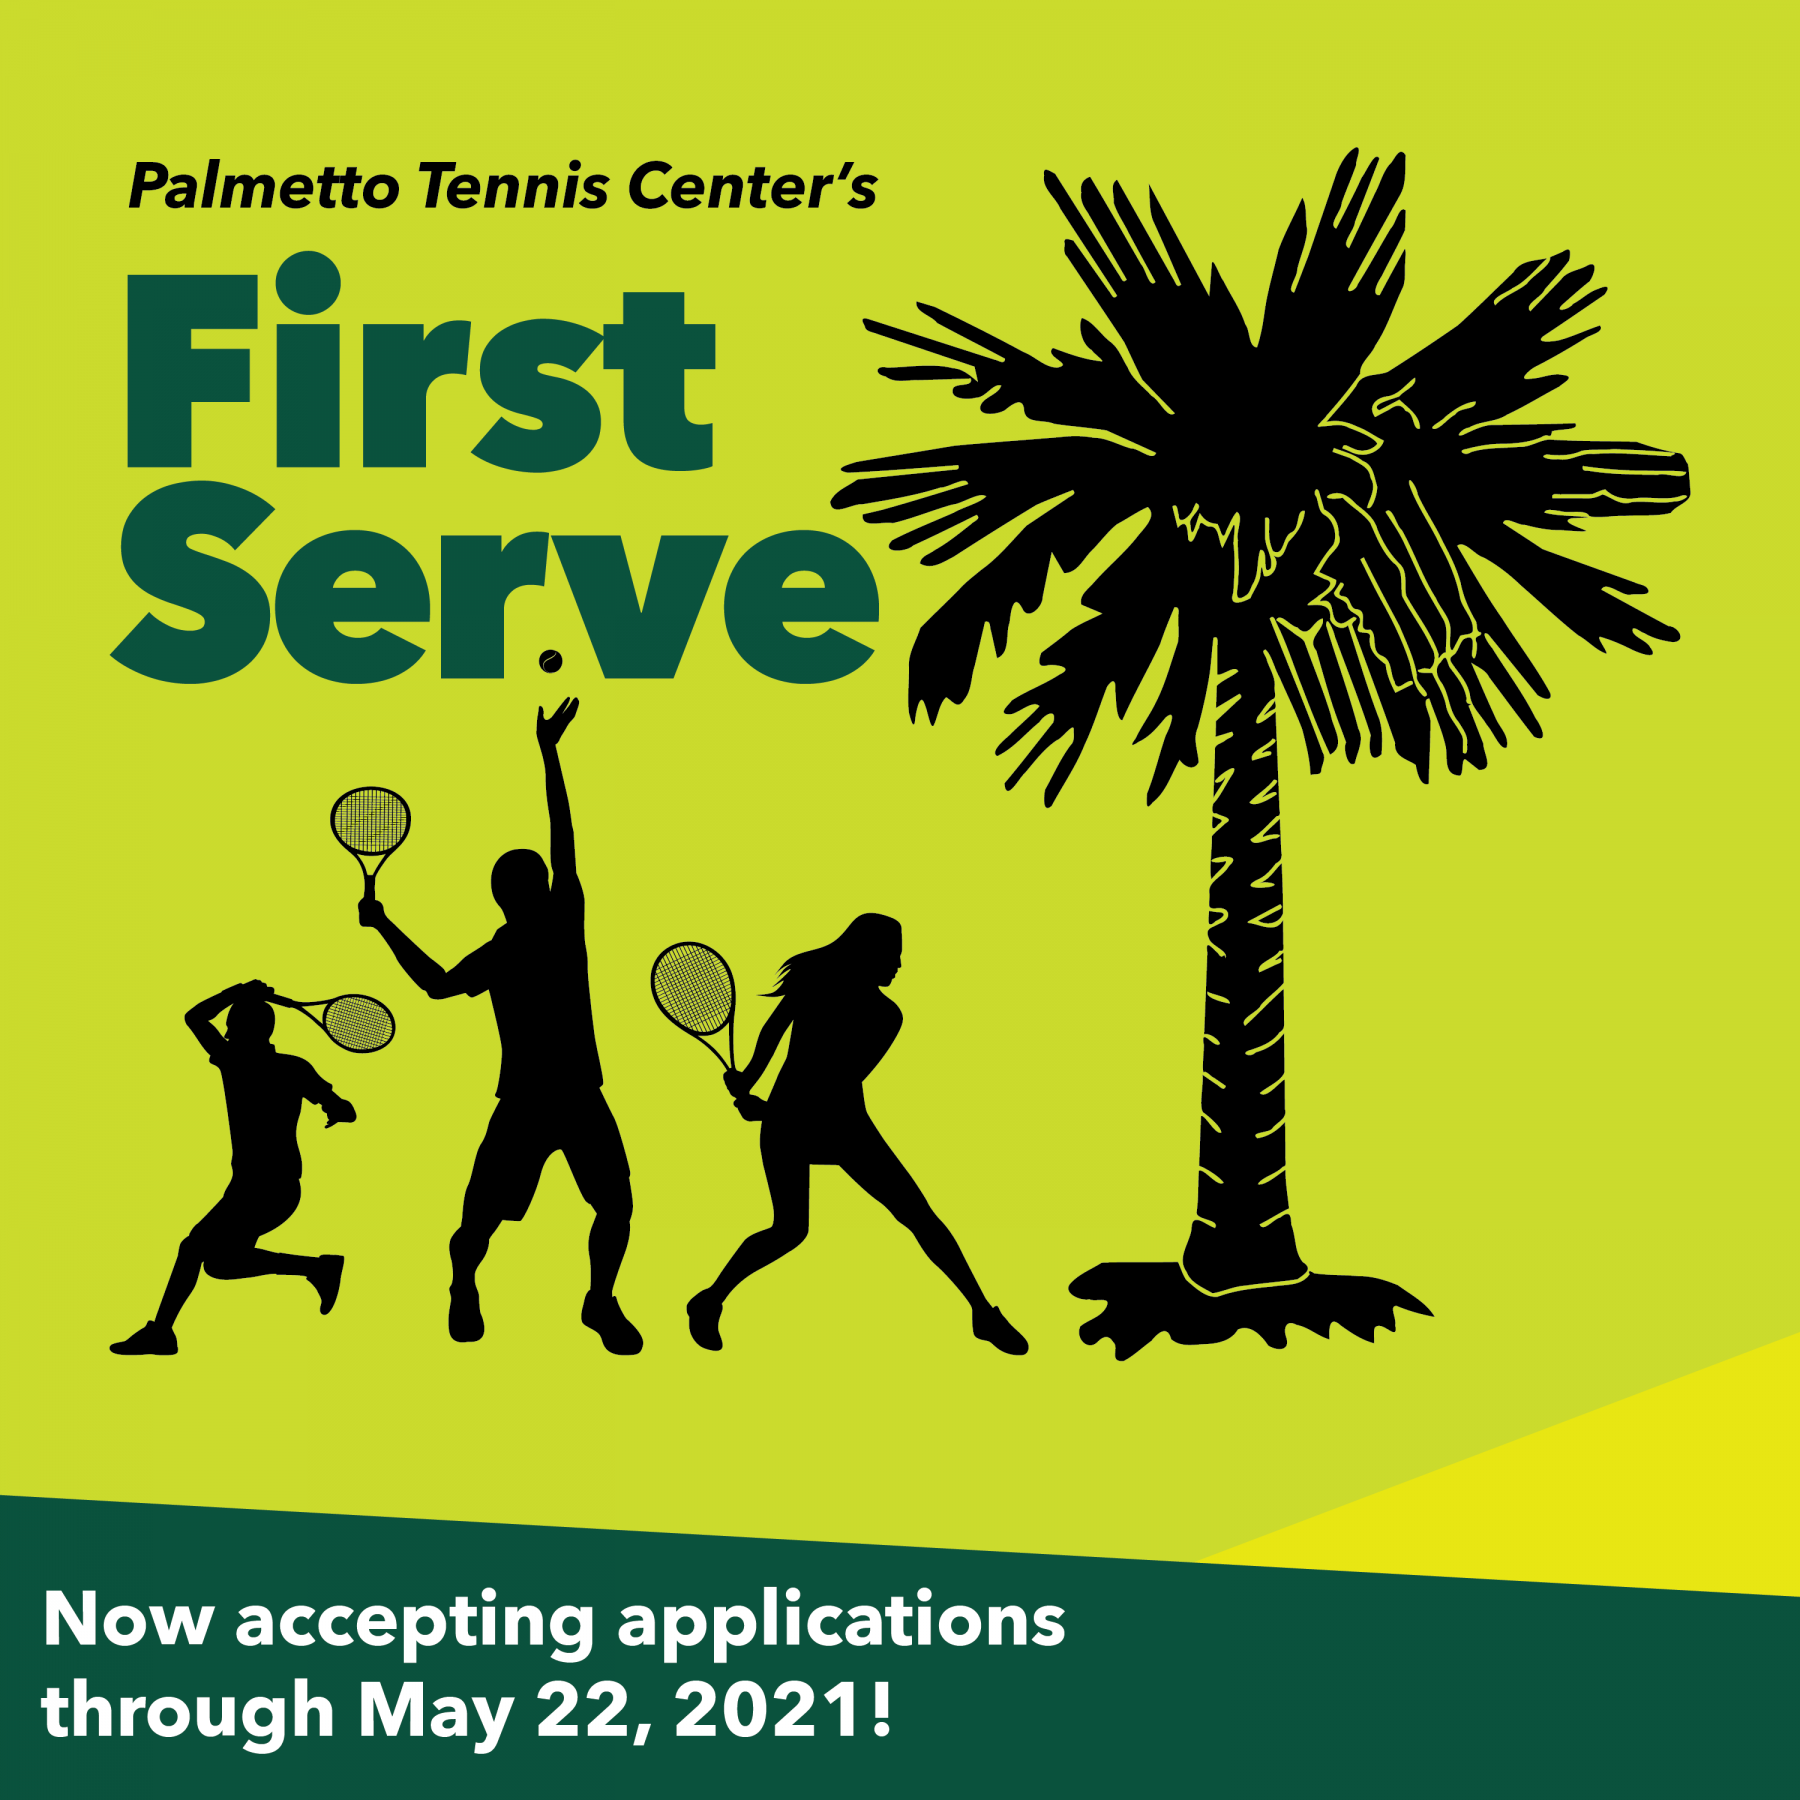 First Serve Applications Accepted through May 22, 2021